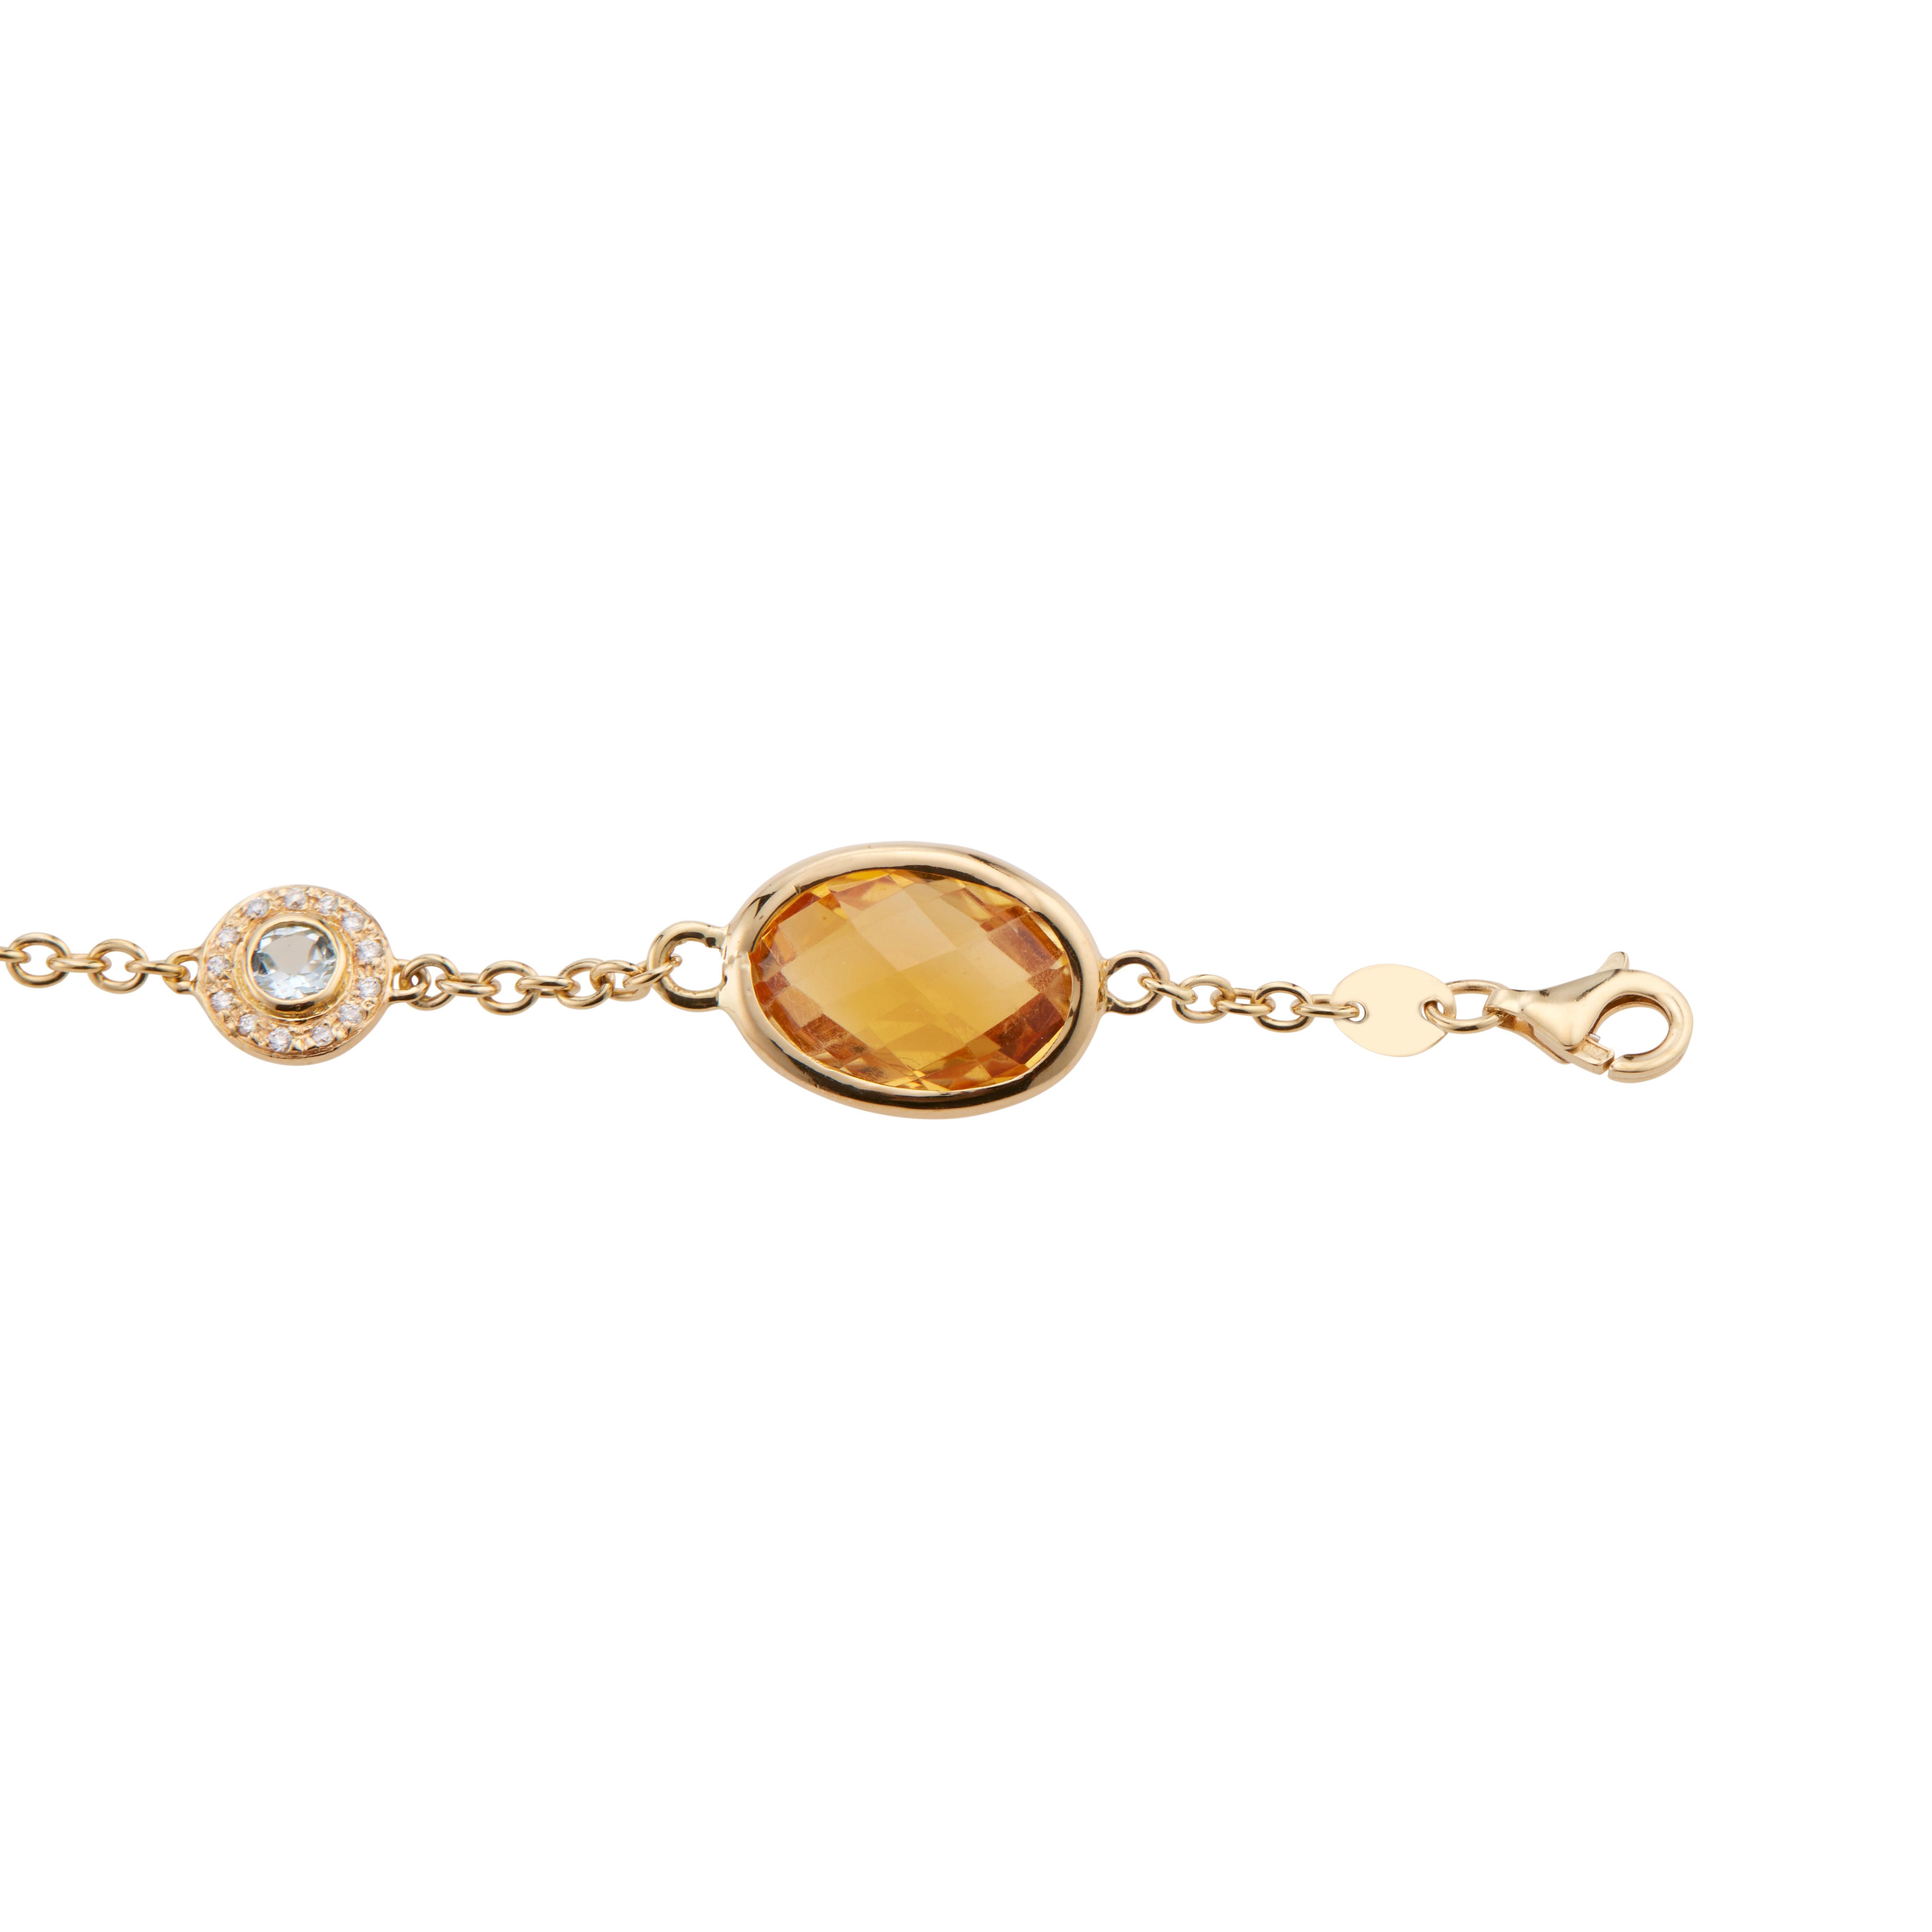 Contemporary Citrine, aqua and diamond 18k yellow gold link bracelet. Signed KMcD. 3 oval citrines accented with 3 aquamarines, each with halos of diamonds. 7.25 inches in length. 

3 oval yellowish orange quilted citrines, approx. 10.00cts
3 round